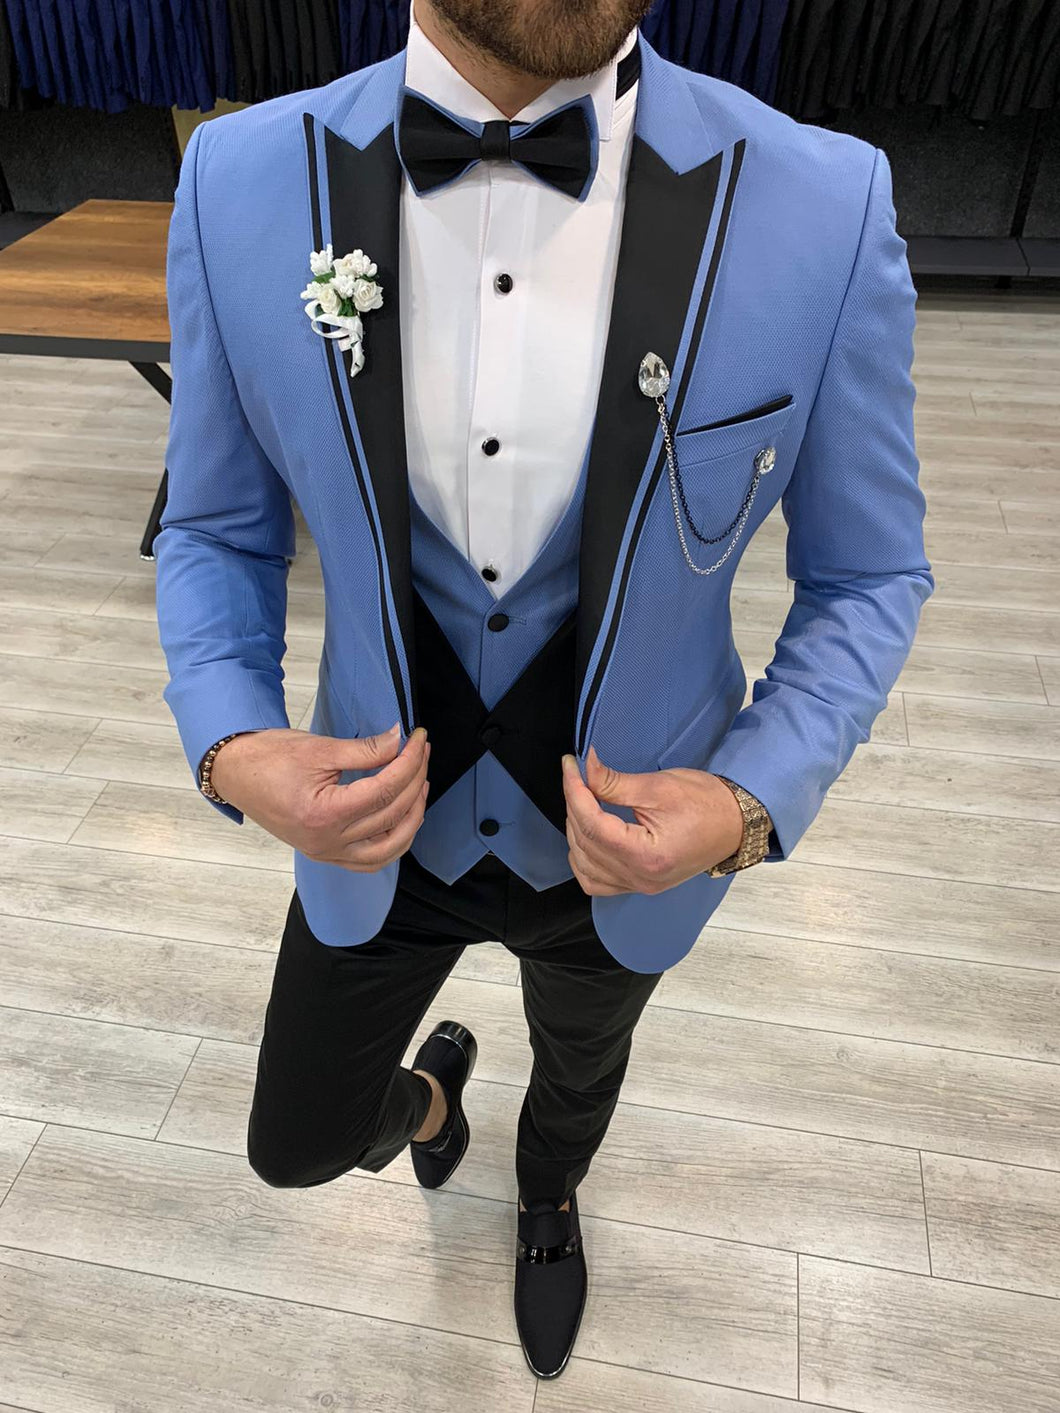 Harrison Baby Blue Pointed Collared Tuxedo